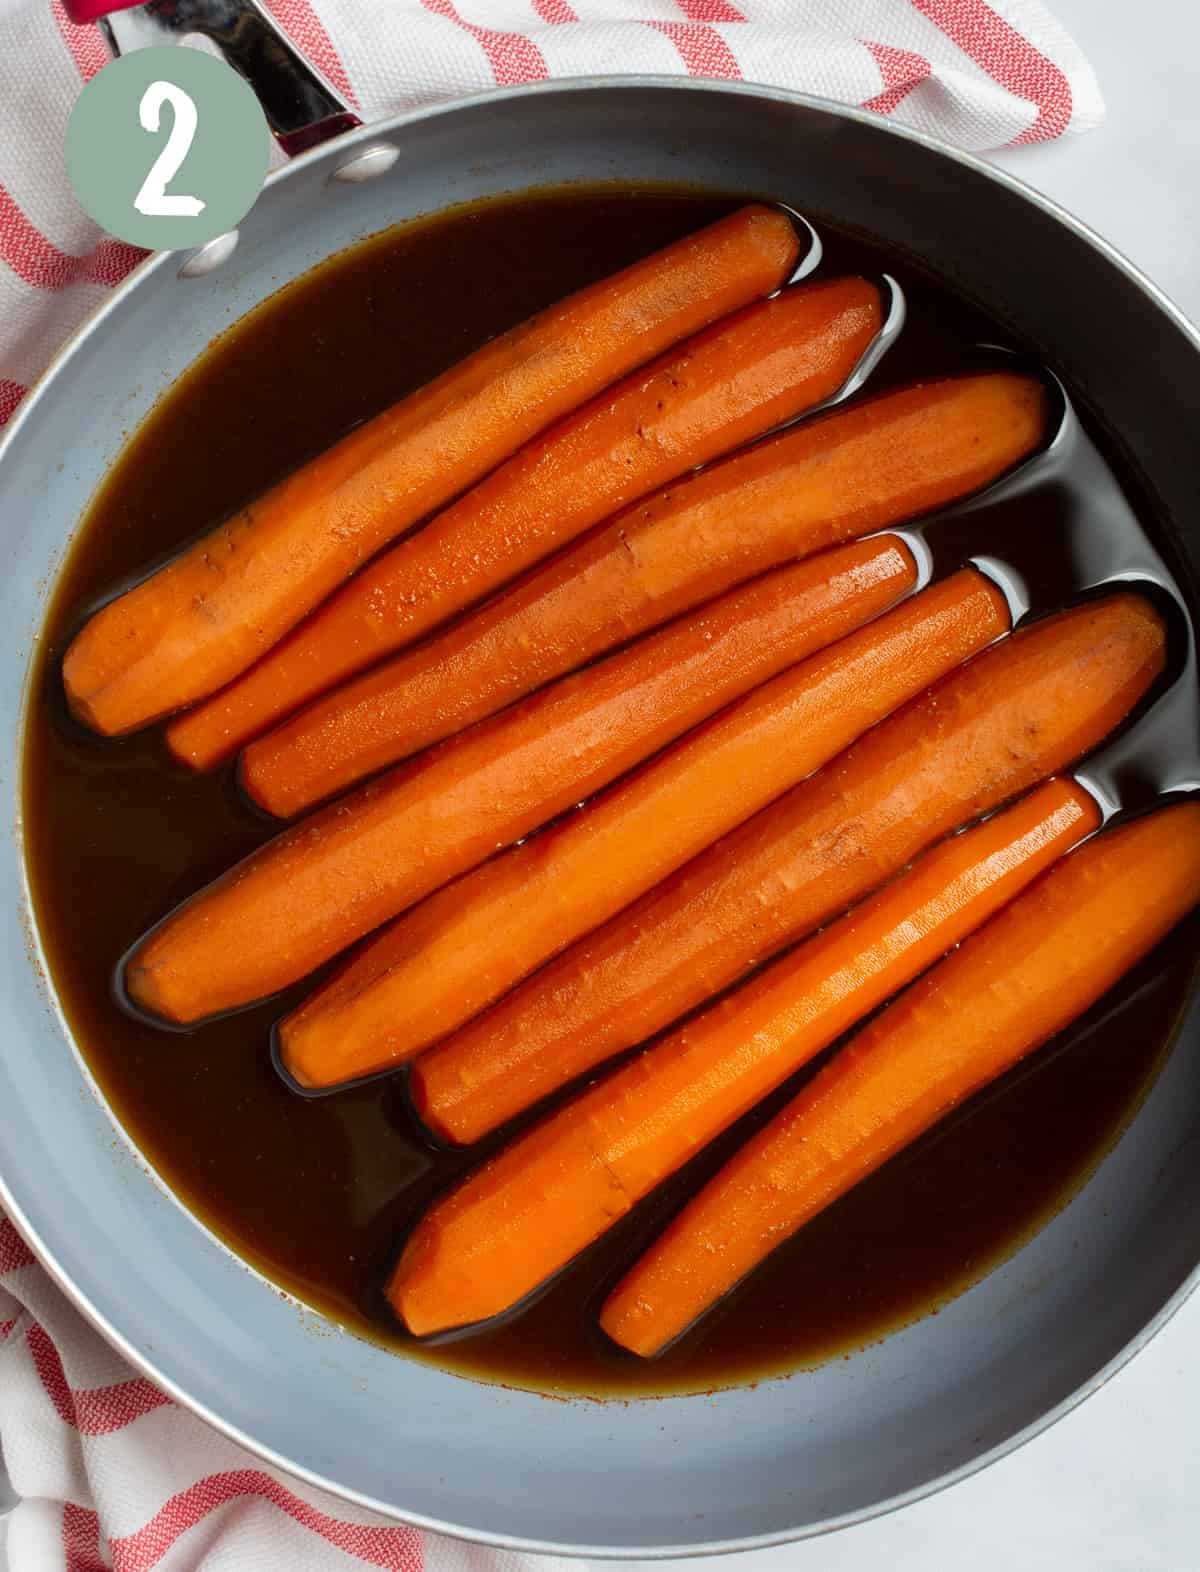 Carrots in a pan cooked in marinade.